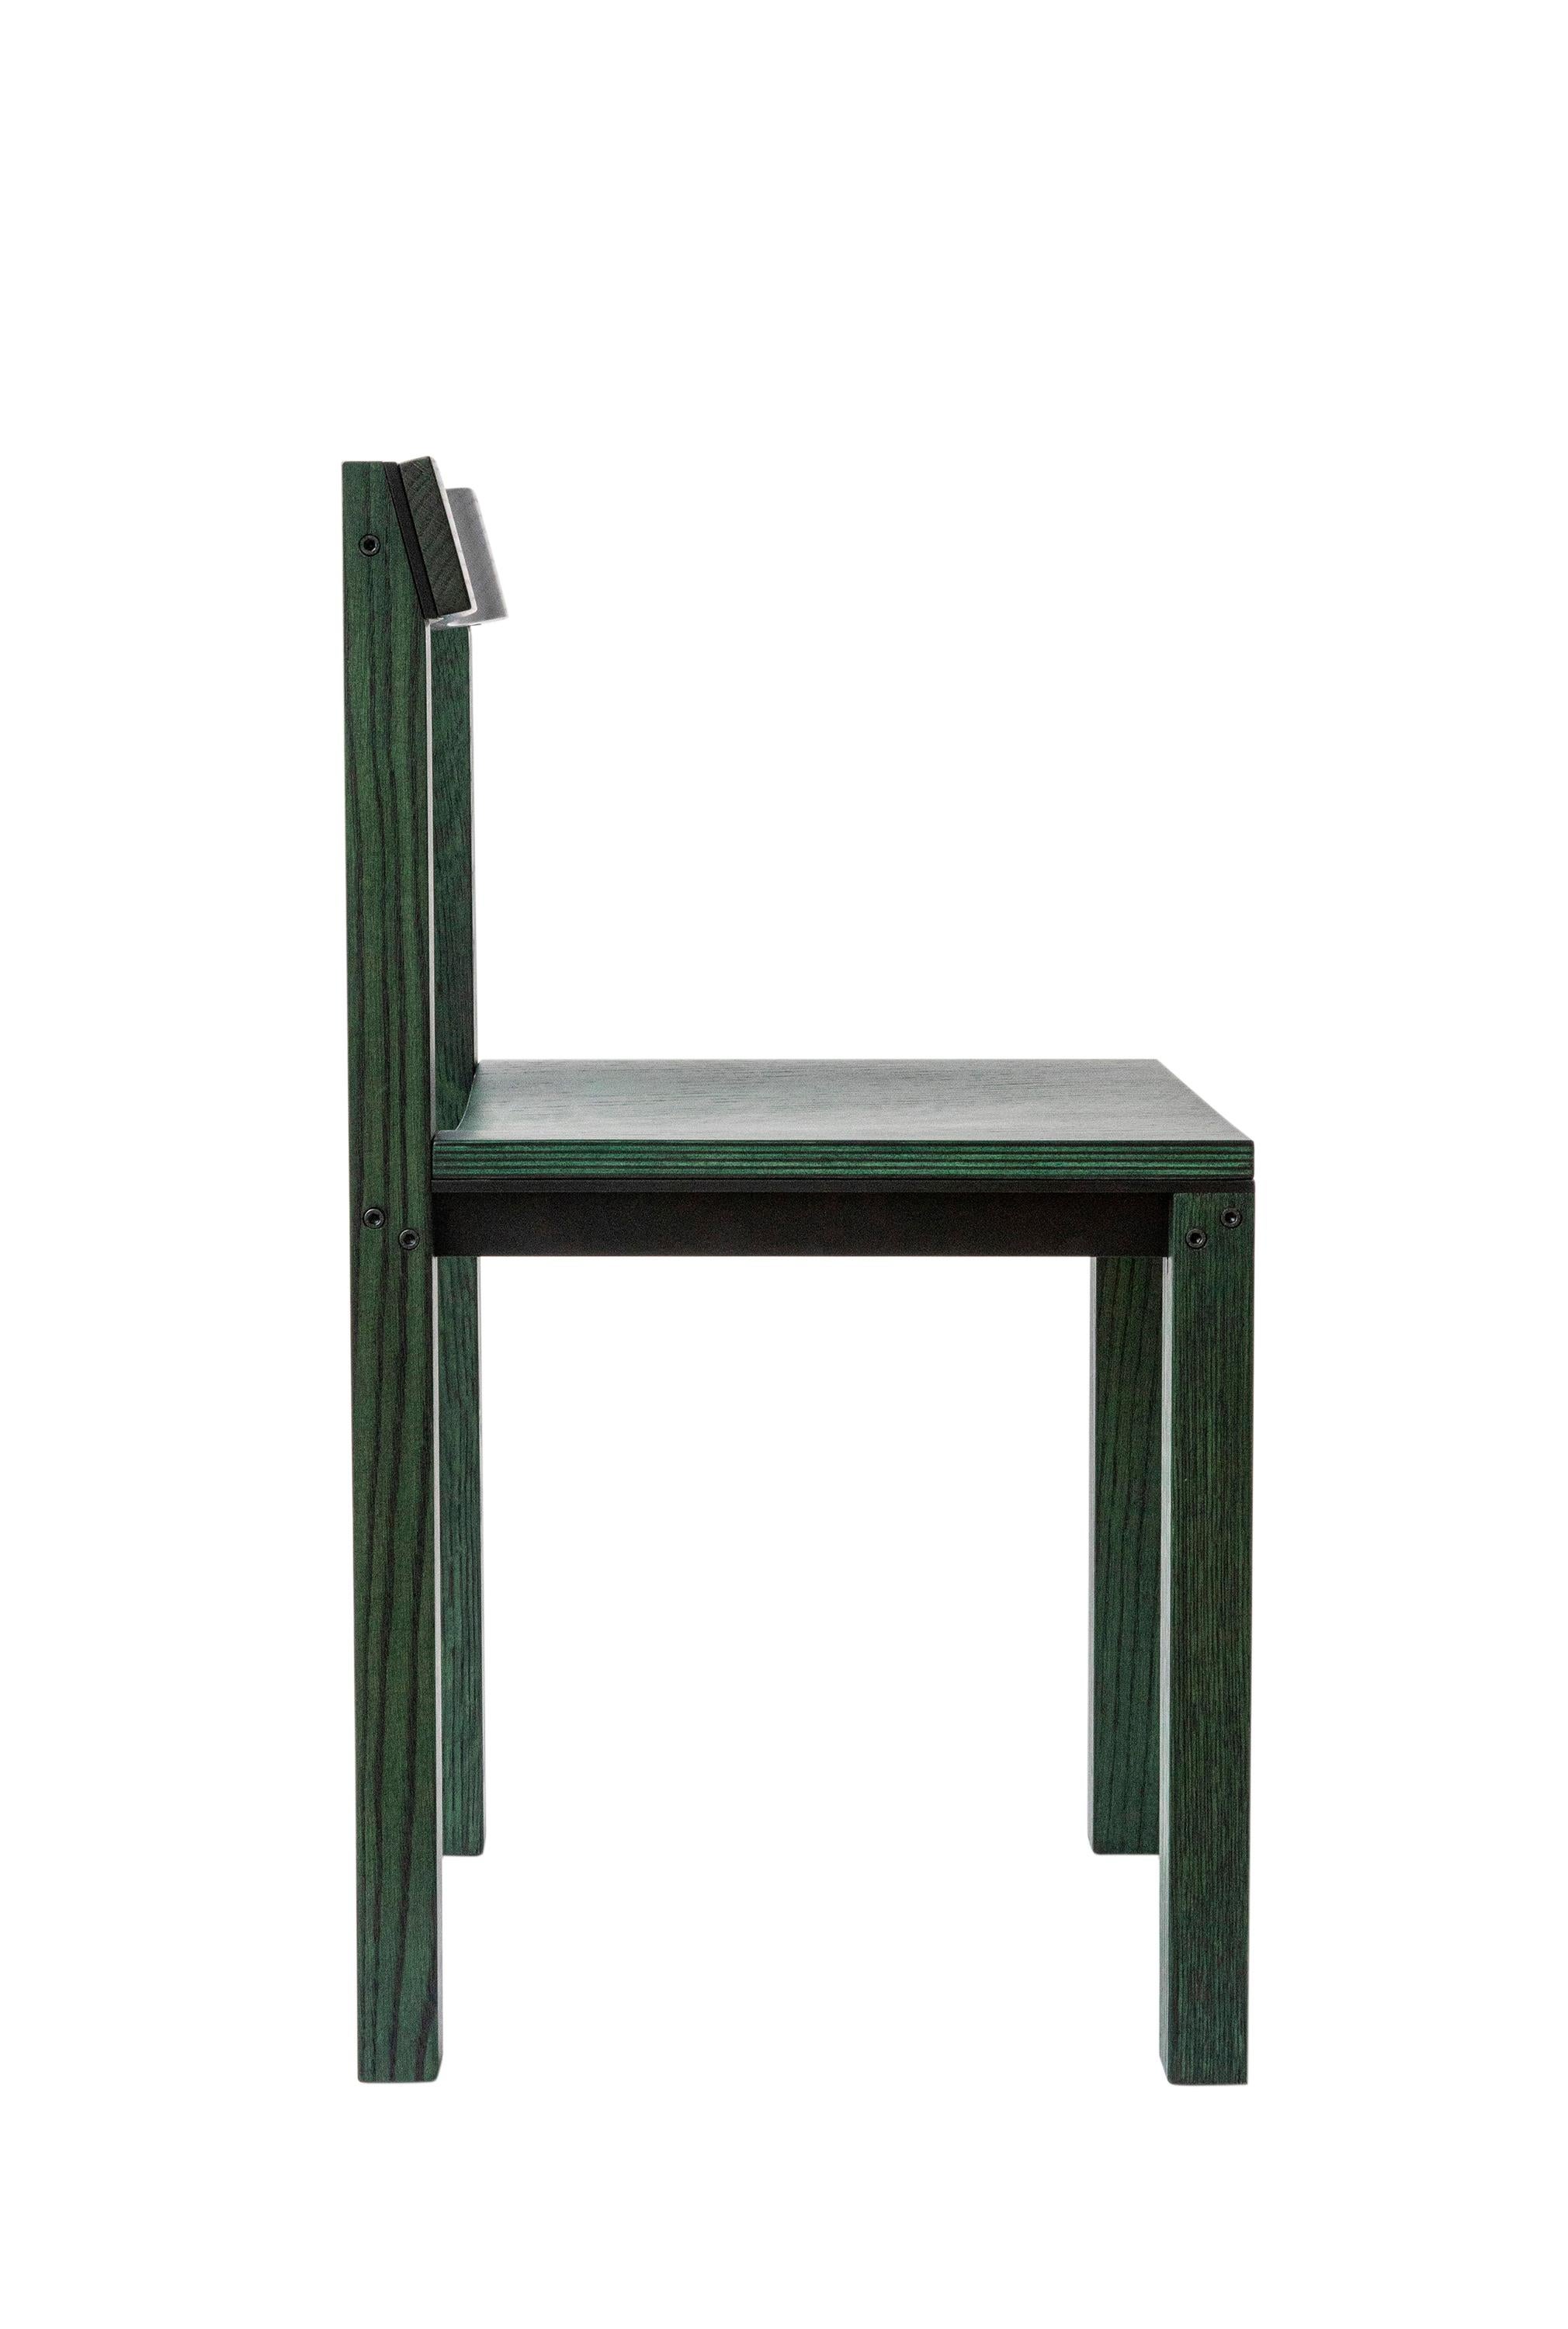 Set of 8 Tal Green Oak Chairs by Kann Design
Dimensions: D 40 x W 44 x H 80 cm.
Materials: Green lacquered oak, aluminum.
Available in other finishes.

The Tal chair designed by Léonard Kadid is made of aluminium and wood.
The T aluminium profiles